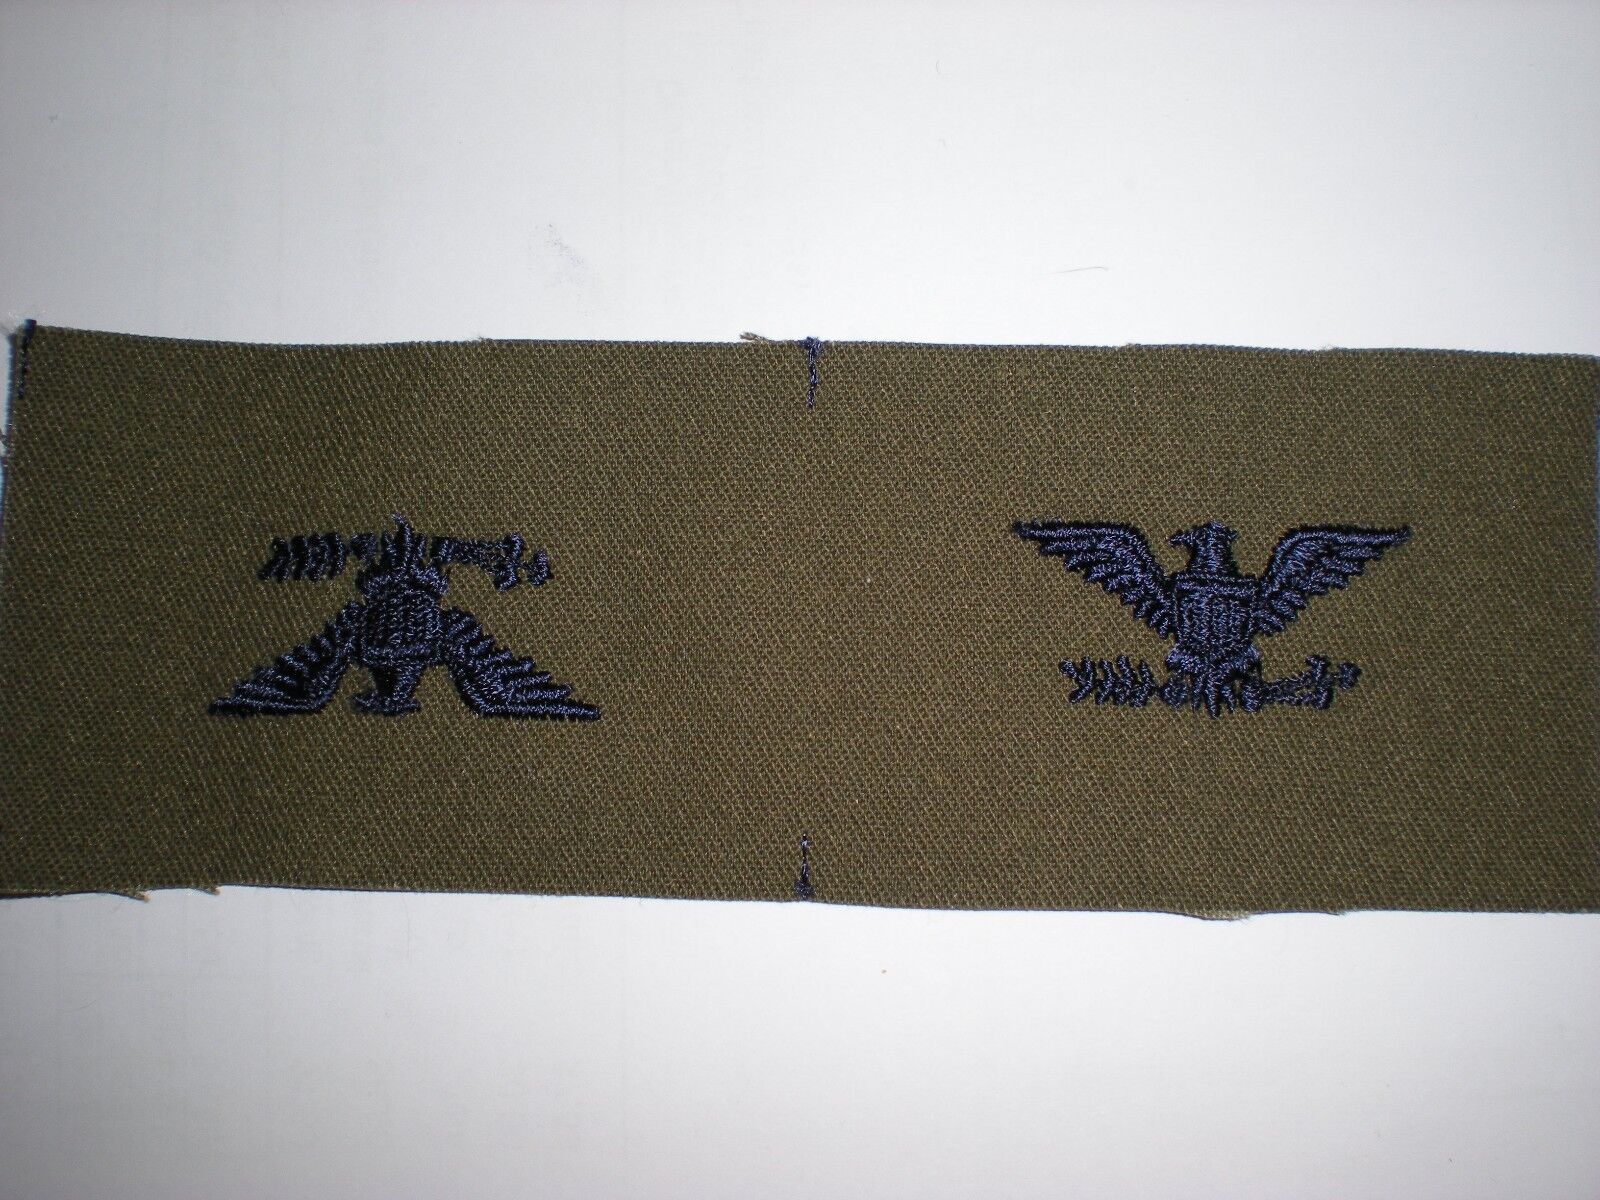 USAF BDU EMBROIDERED COLONEL RANK COLLAR INSIGNIA -1 PAIR